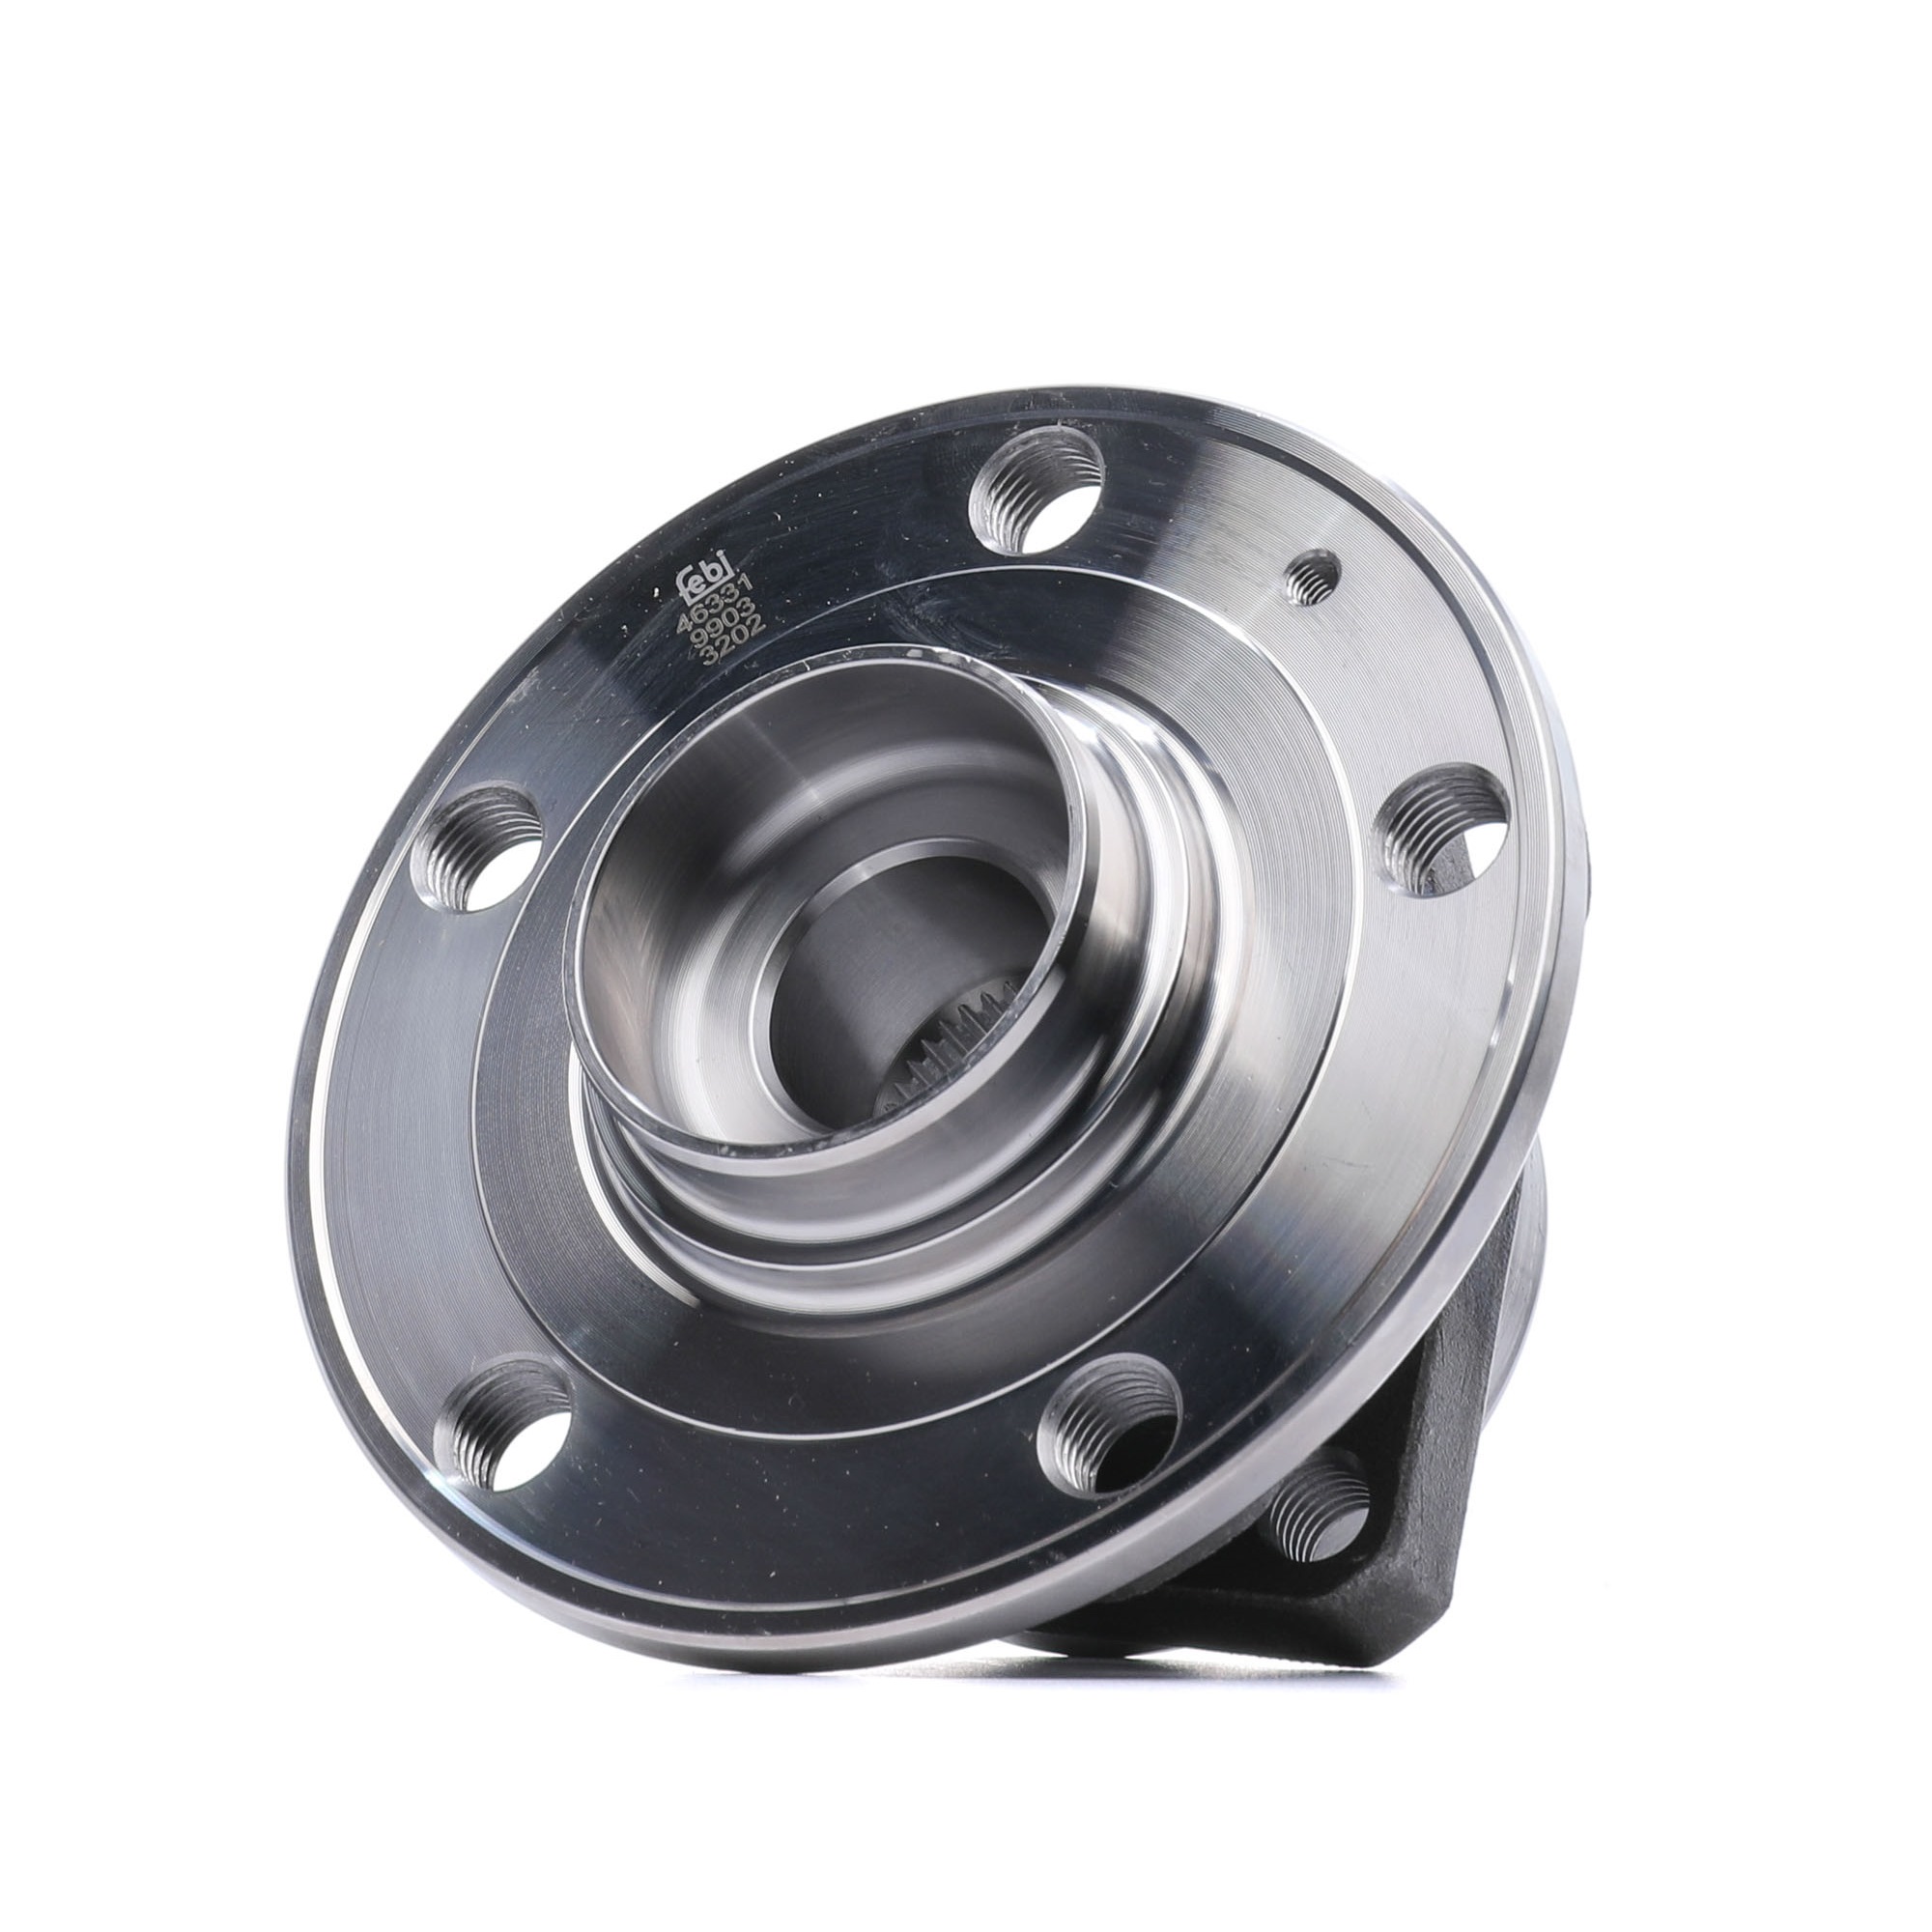 46334 FEBI BILSTEIN Wheel hub assembly VW Wheel Bearing integrated into wheel hub, with integrated magnetic sensor ring, with fastening material, with ABS sensor ring, with wheel hub, 80, 65 mm, Angular Ball Bearing